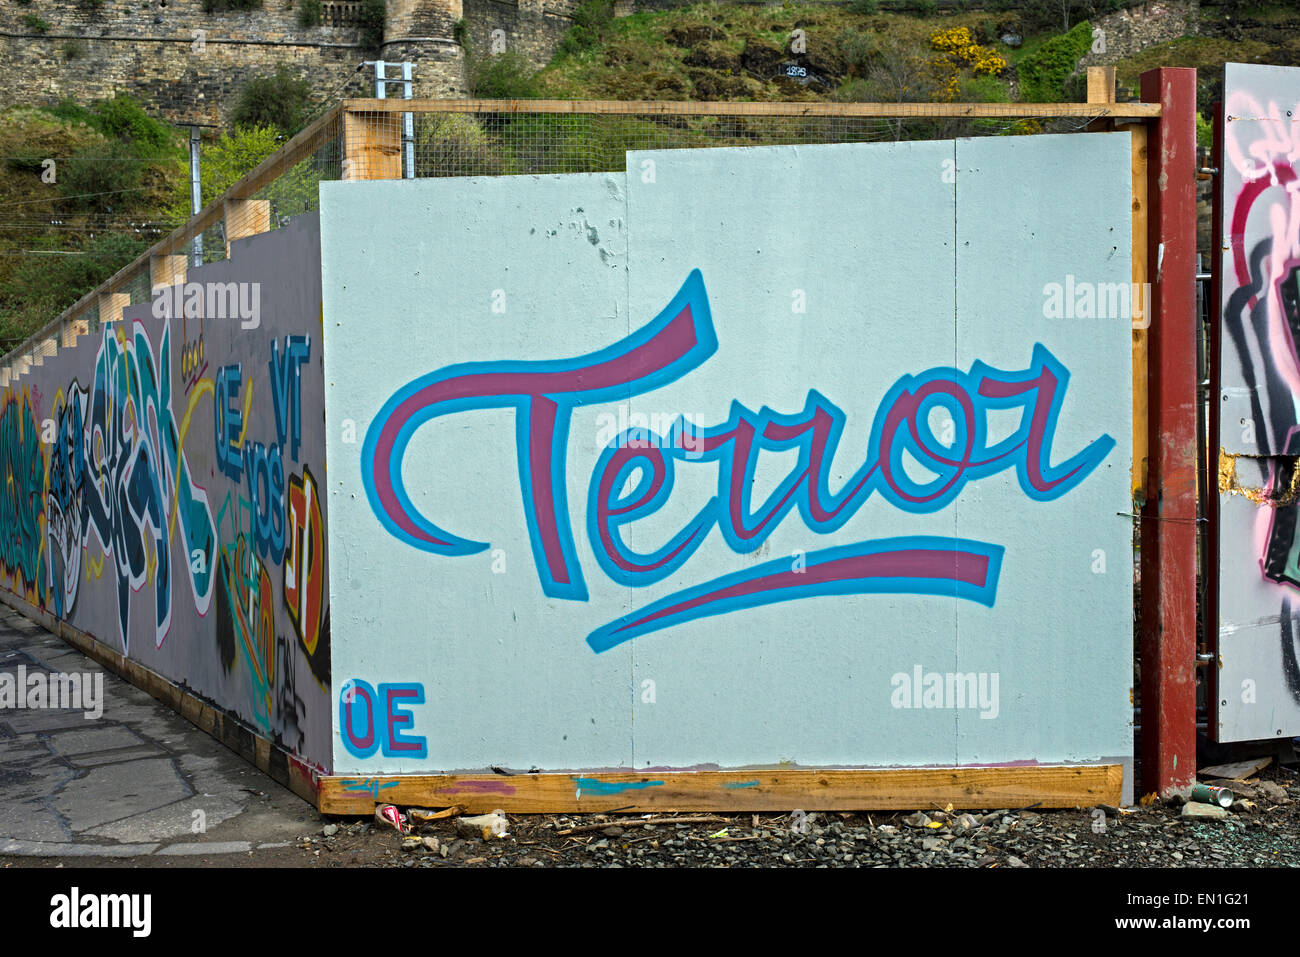 The word "Terror" painted on boards around a building site in the canongate area of Edinburgh. Stock Photo